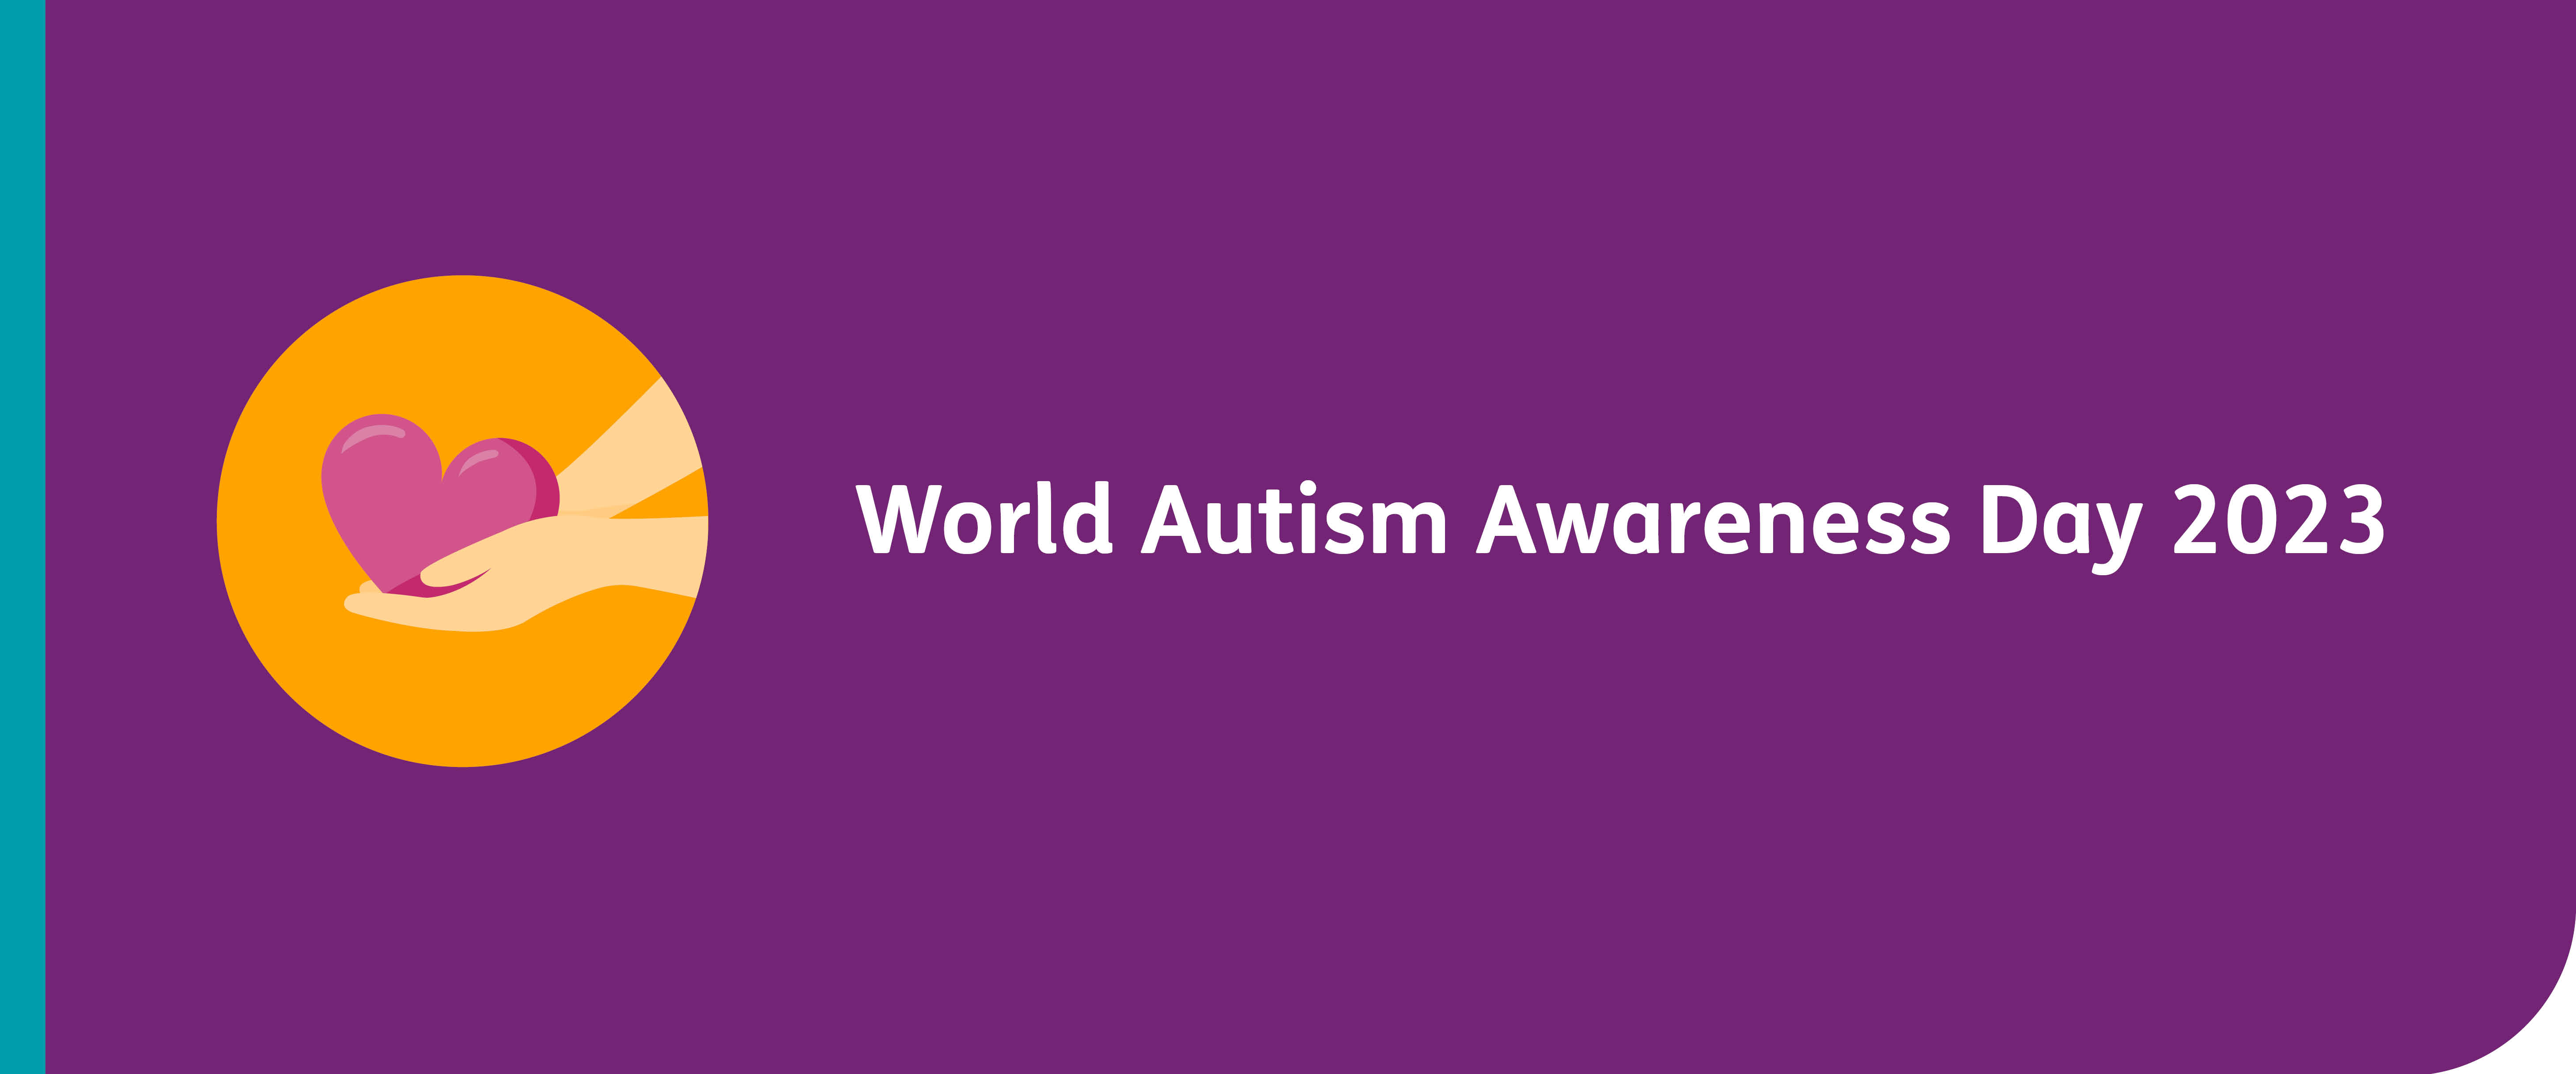 World Autism Awareness Day 2023 with a cartoon of 2 hands holding a love heart